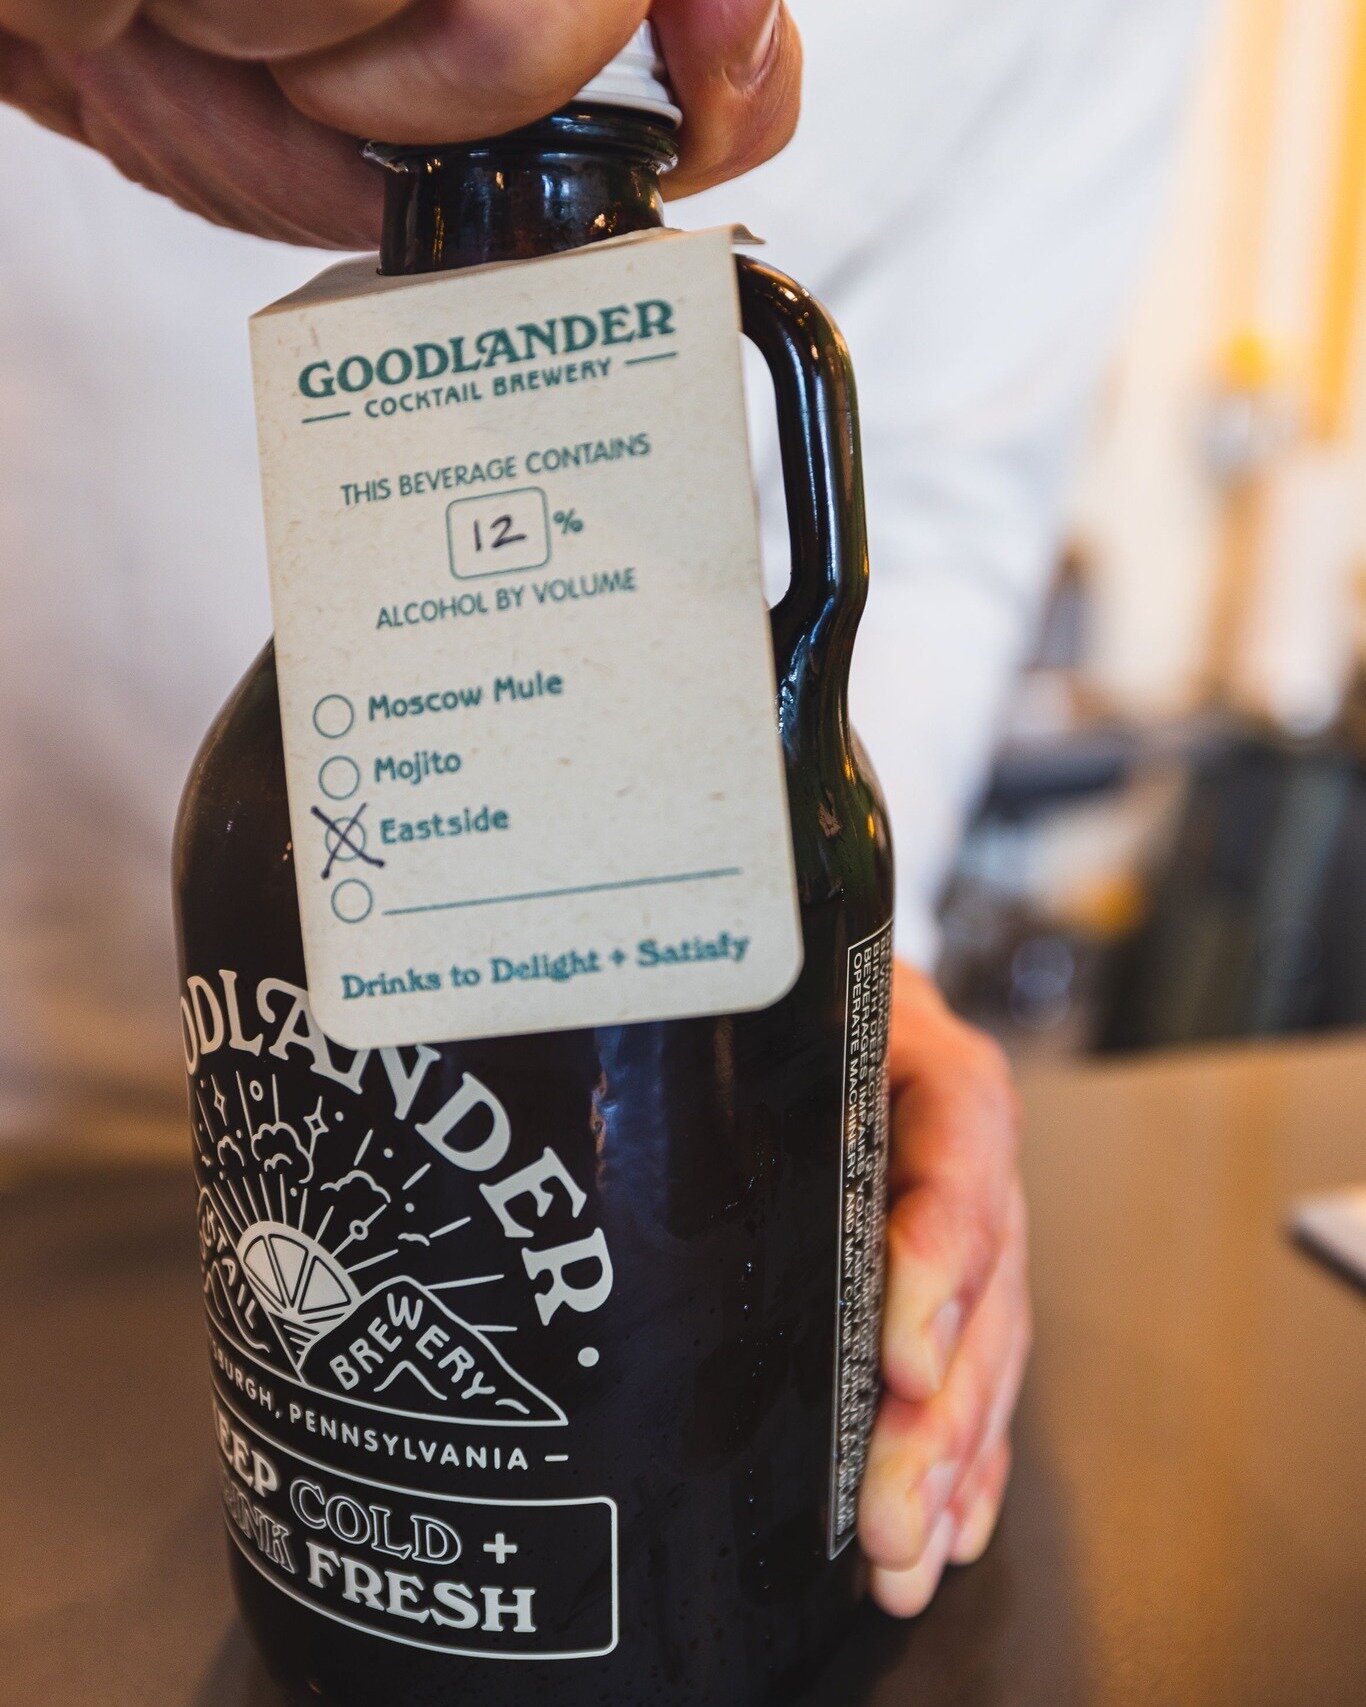 Check out these reusable, returnable growlers. Goodlander is out here, trying to take it forward by bringing it back. These 32-oz dark amber glass baddies protect your EASTSIDES (12% abv) from the sun and the wind, and also probably are a good defens